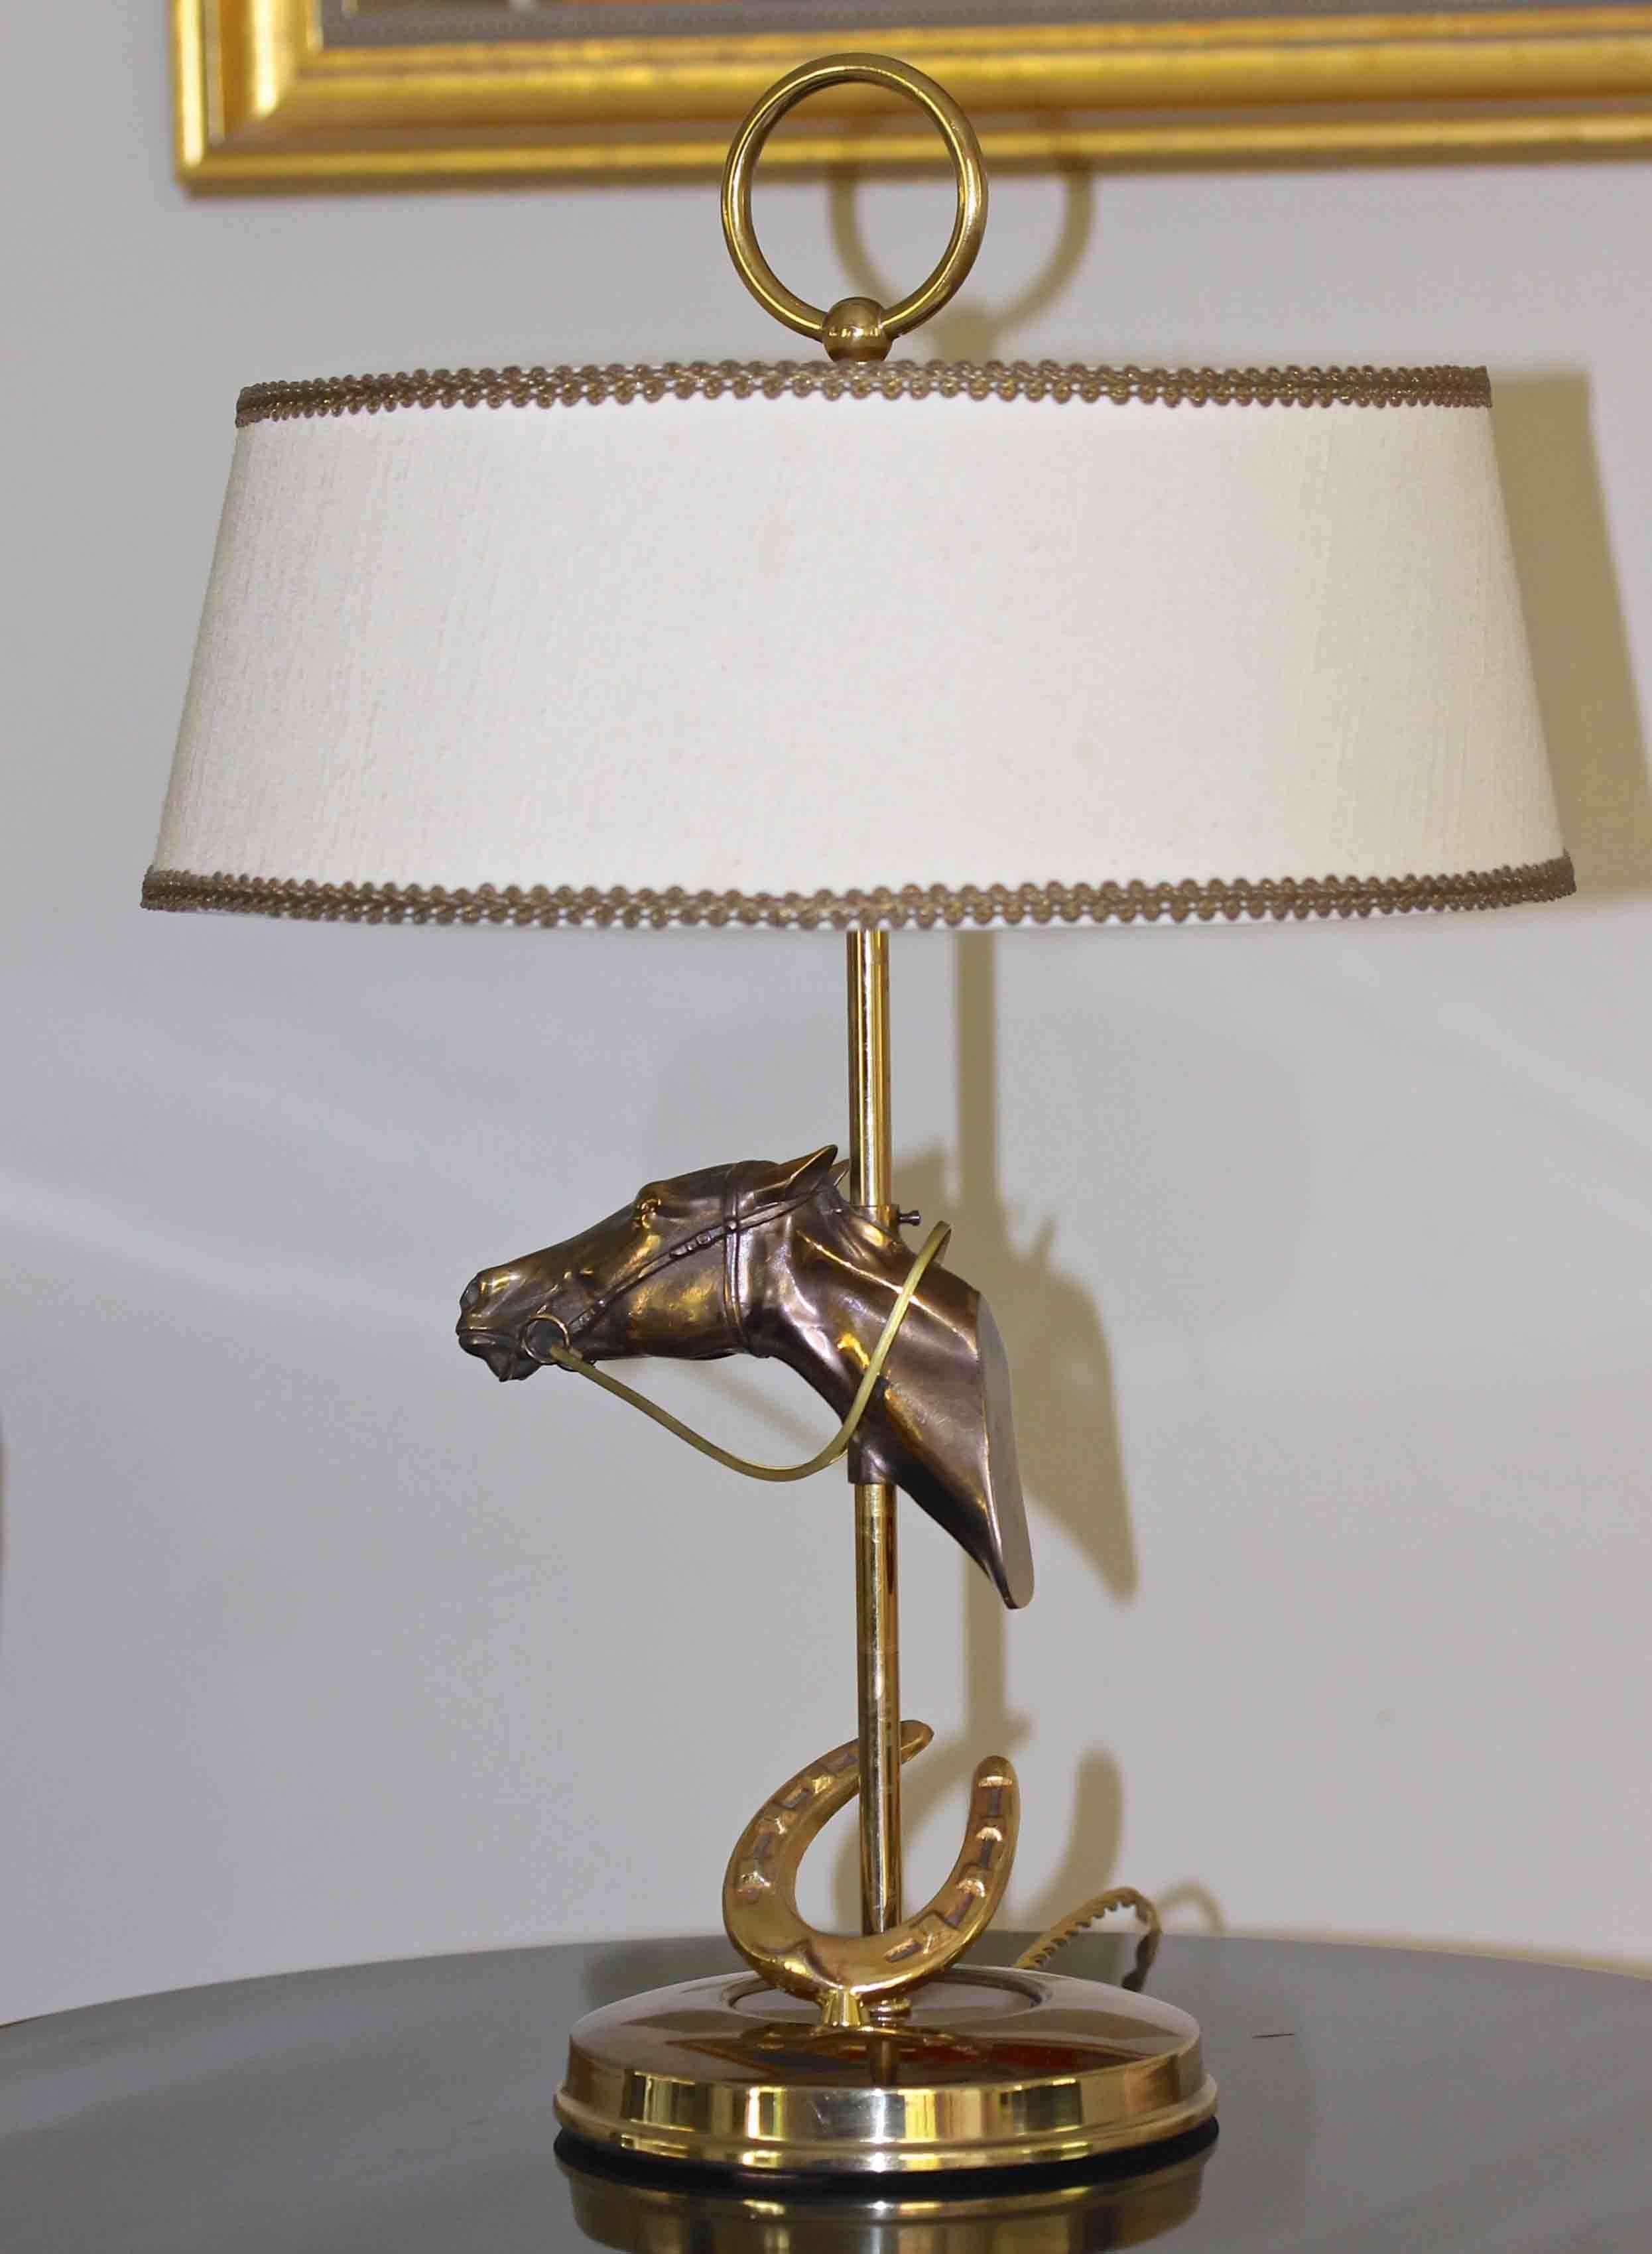 Unique smaller scale equestrian horse head and horse shoe motif brass finish table lamp from France. Original shade included. Uses two 40-watt round candelabra base bulbs. Newly wired for US with French style rayon covered cord. 

Size without